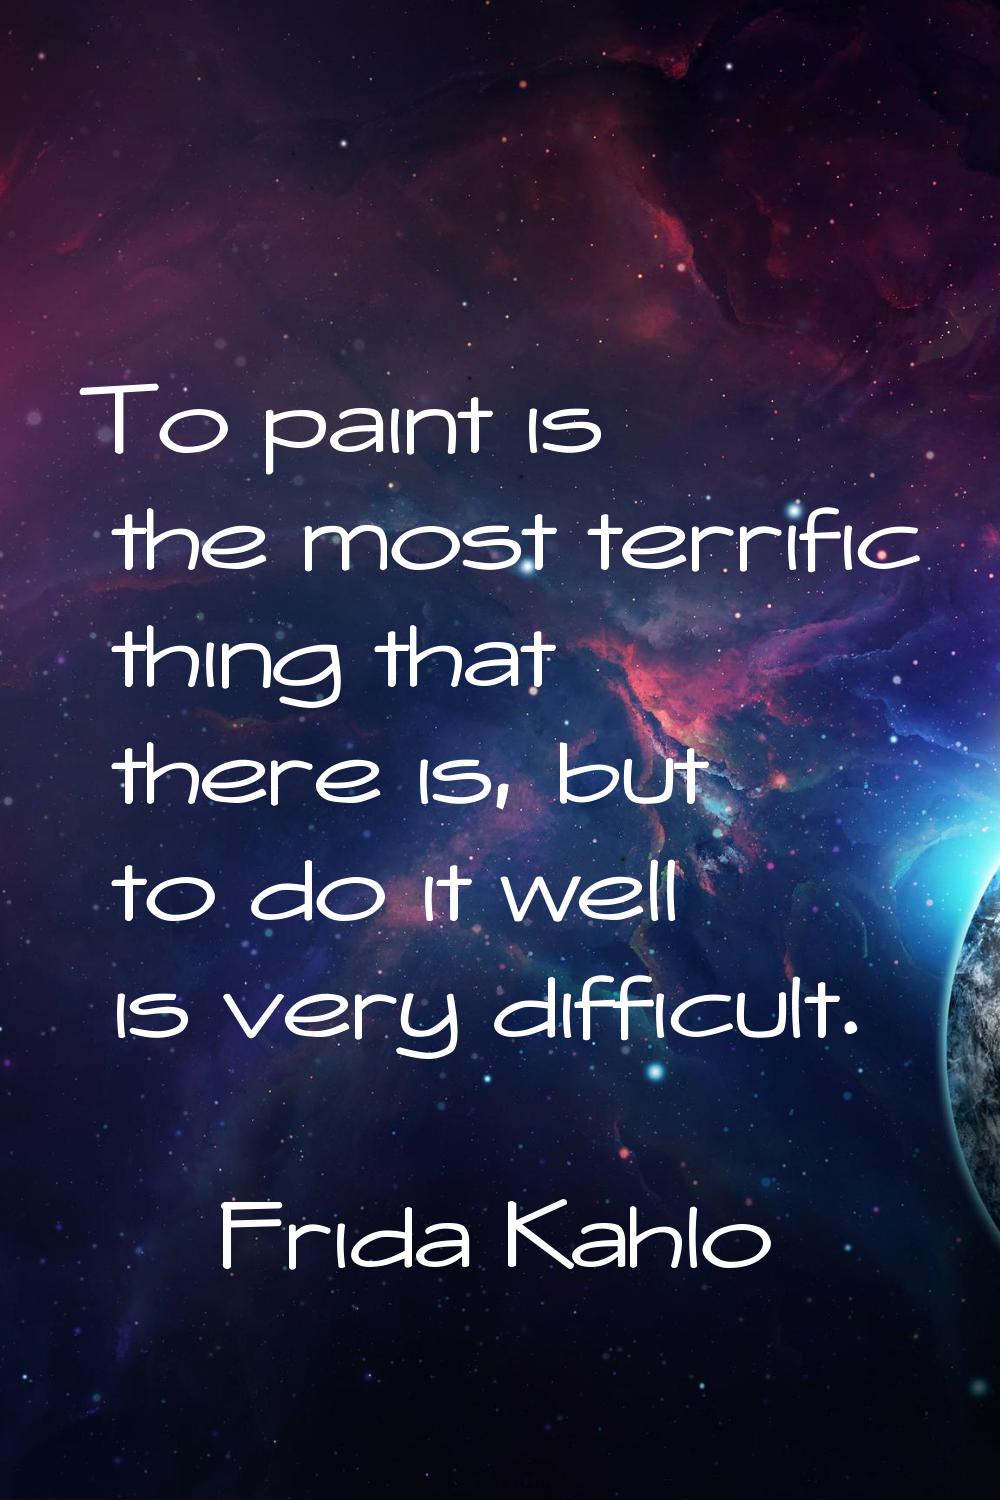 To paint is the most terrific thing that there is, but to do it well is very difficult.